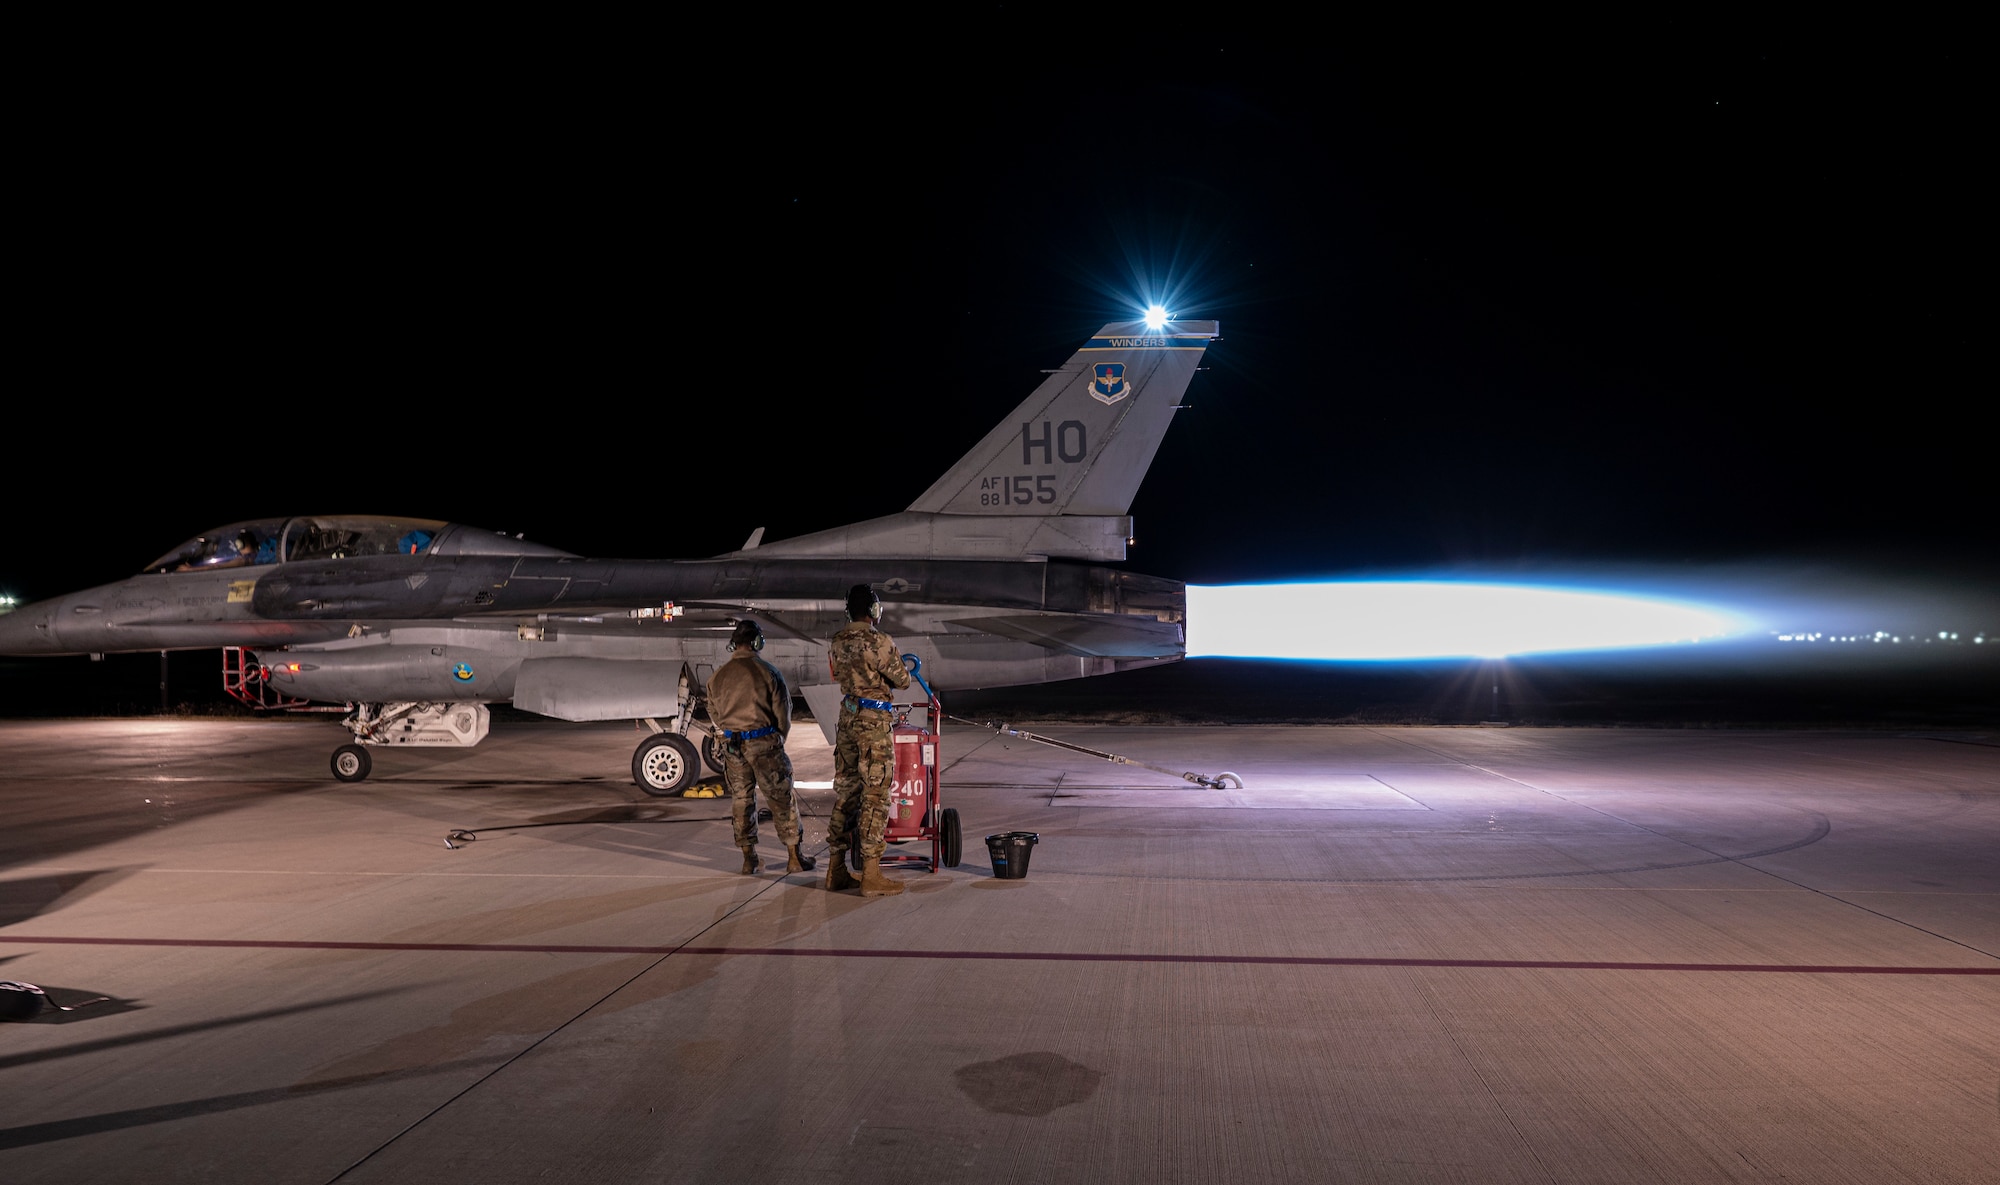 Airmen from the 311th Aircraft Maintenance Unit conduct an F-16 Viper high-power engine run afterburner at Holloman Air Force Base, New Mexico, Nov. 16, 2023. Afterburner operation occurs when raw jet fuel is injected into the engine augmenter, resulting in a long cone of fire out of the exhaust and generating twenty-four thousand pounds of thrust propelling the airframe. (U.S. Air Force photo by U.S. Air Force Airman 1st Class Michelle Ferrari)